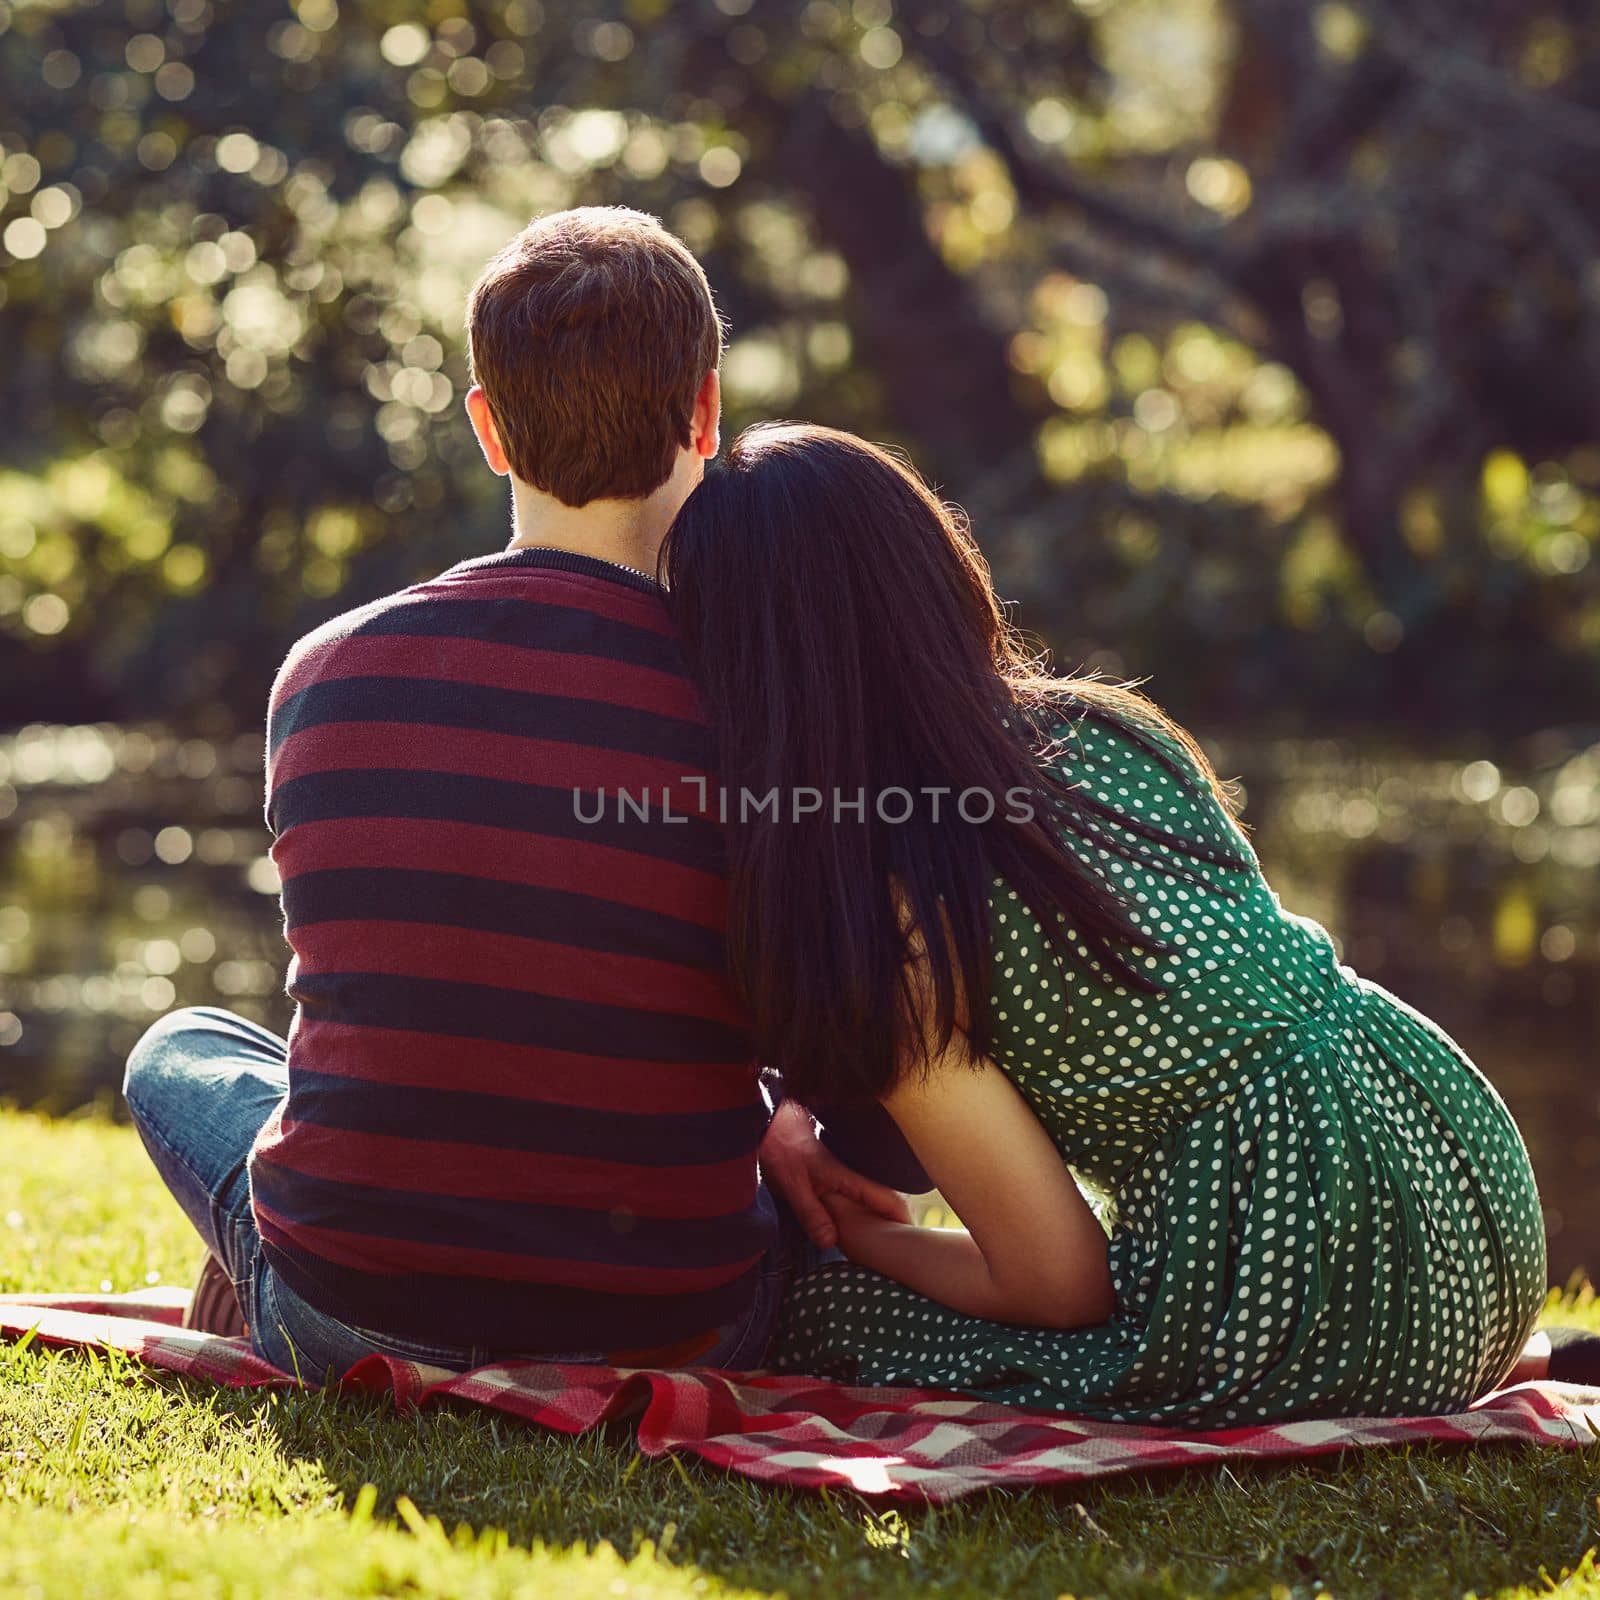 Their first date was in the park. Rearview shot of an affectionate young couple having a romantic picnic in the park